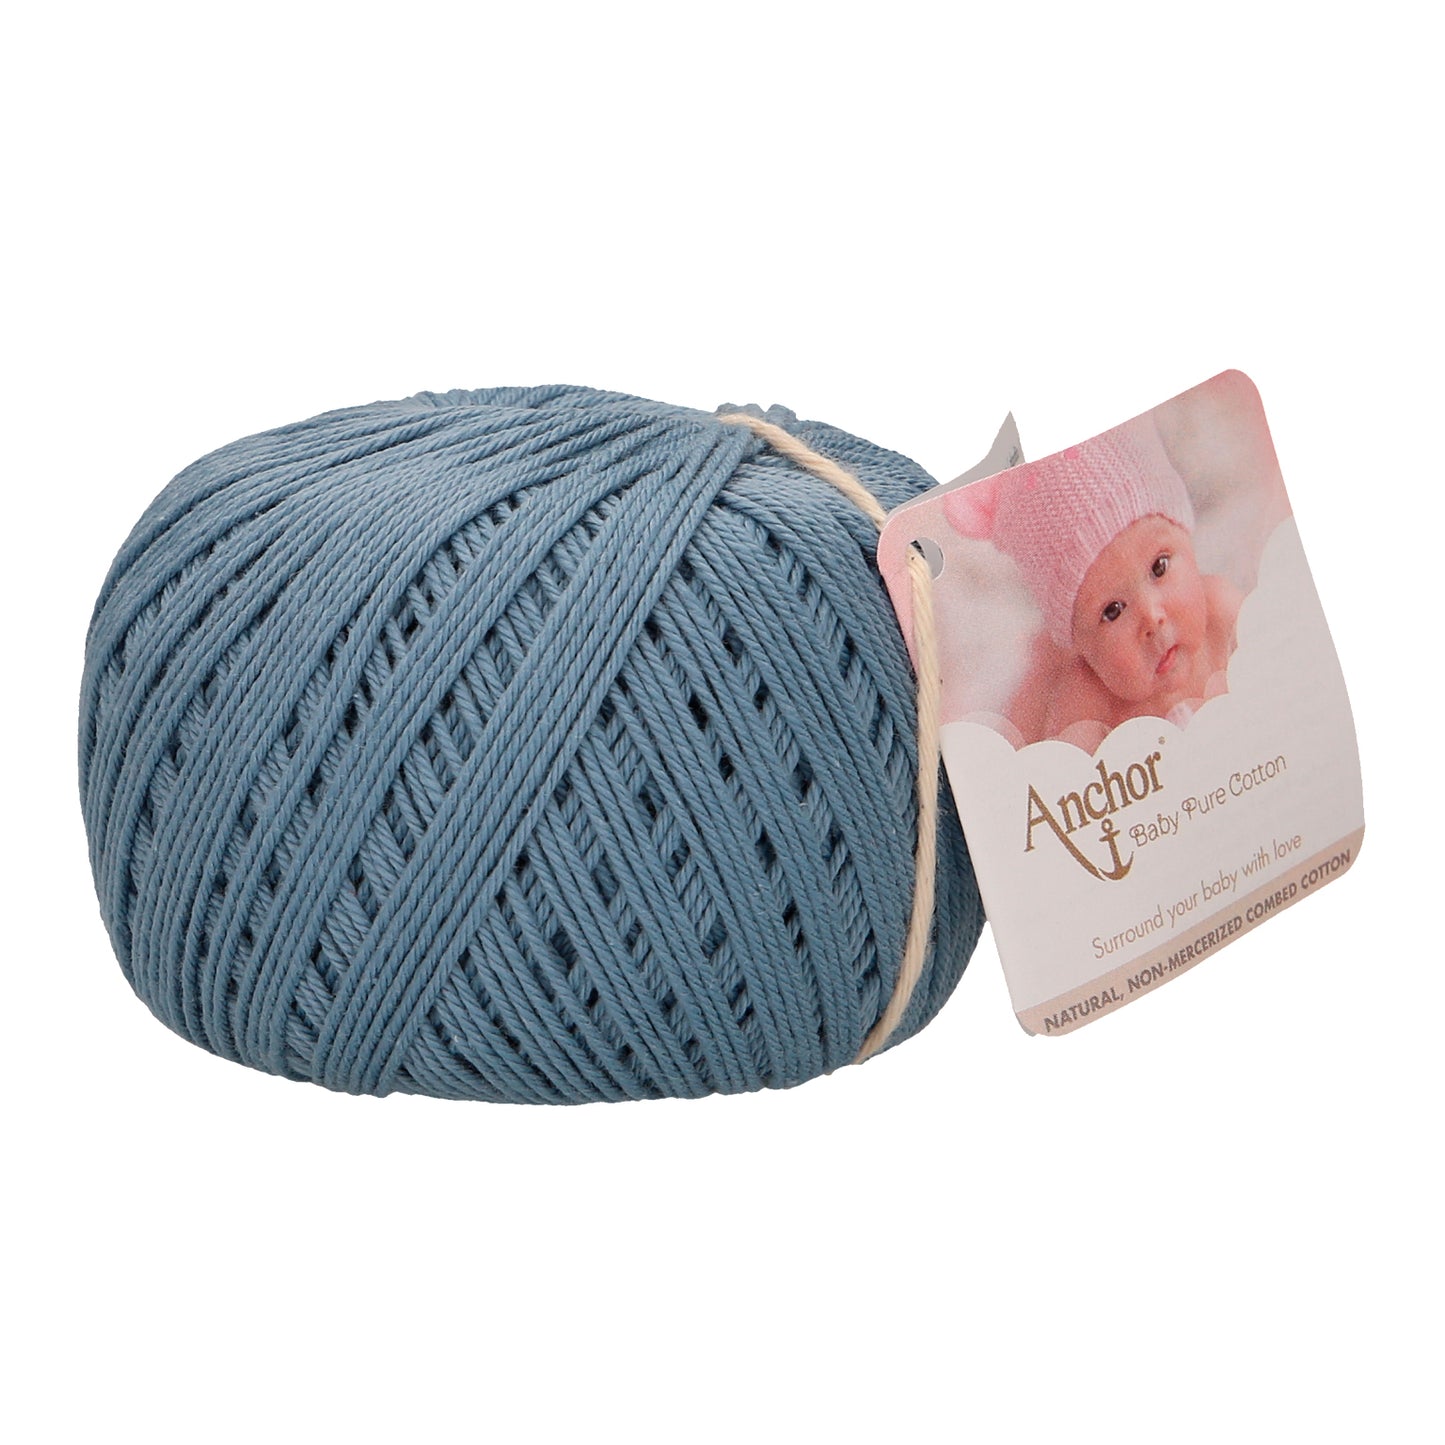 Anchor Baby Pure Cotton 4ply Yarn Mid blue 0421